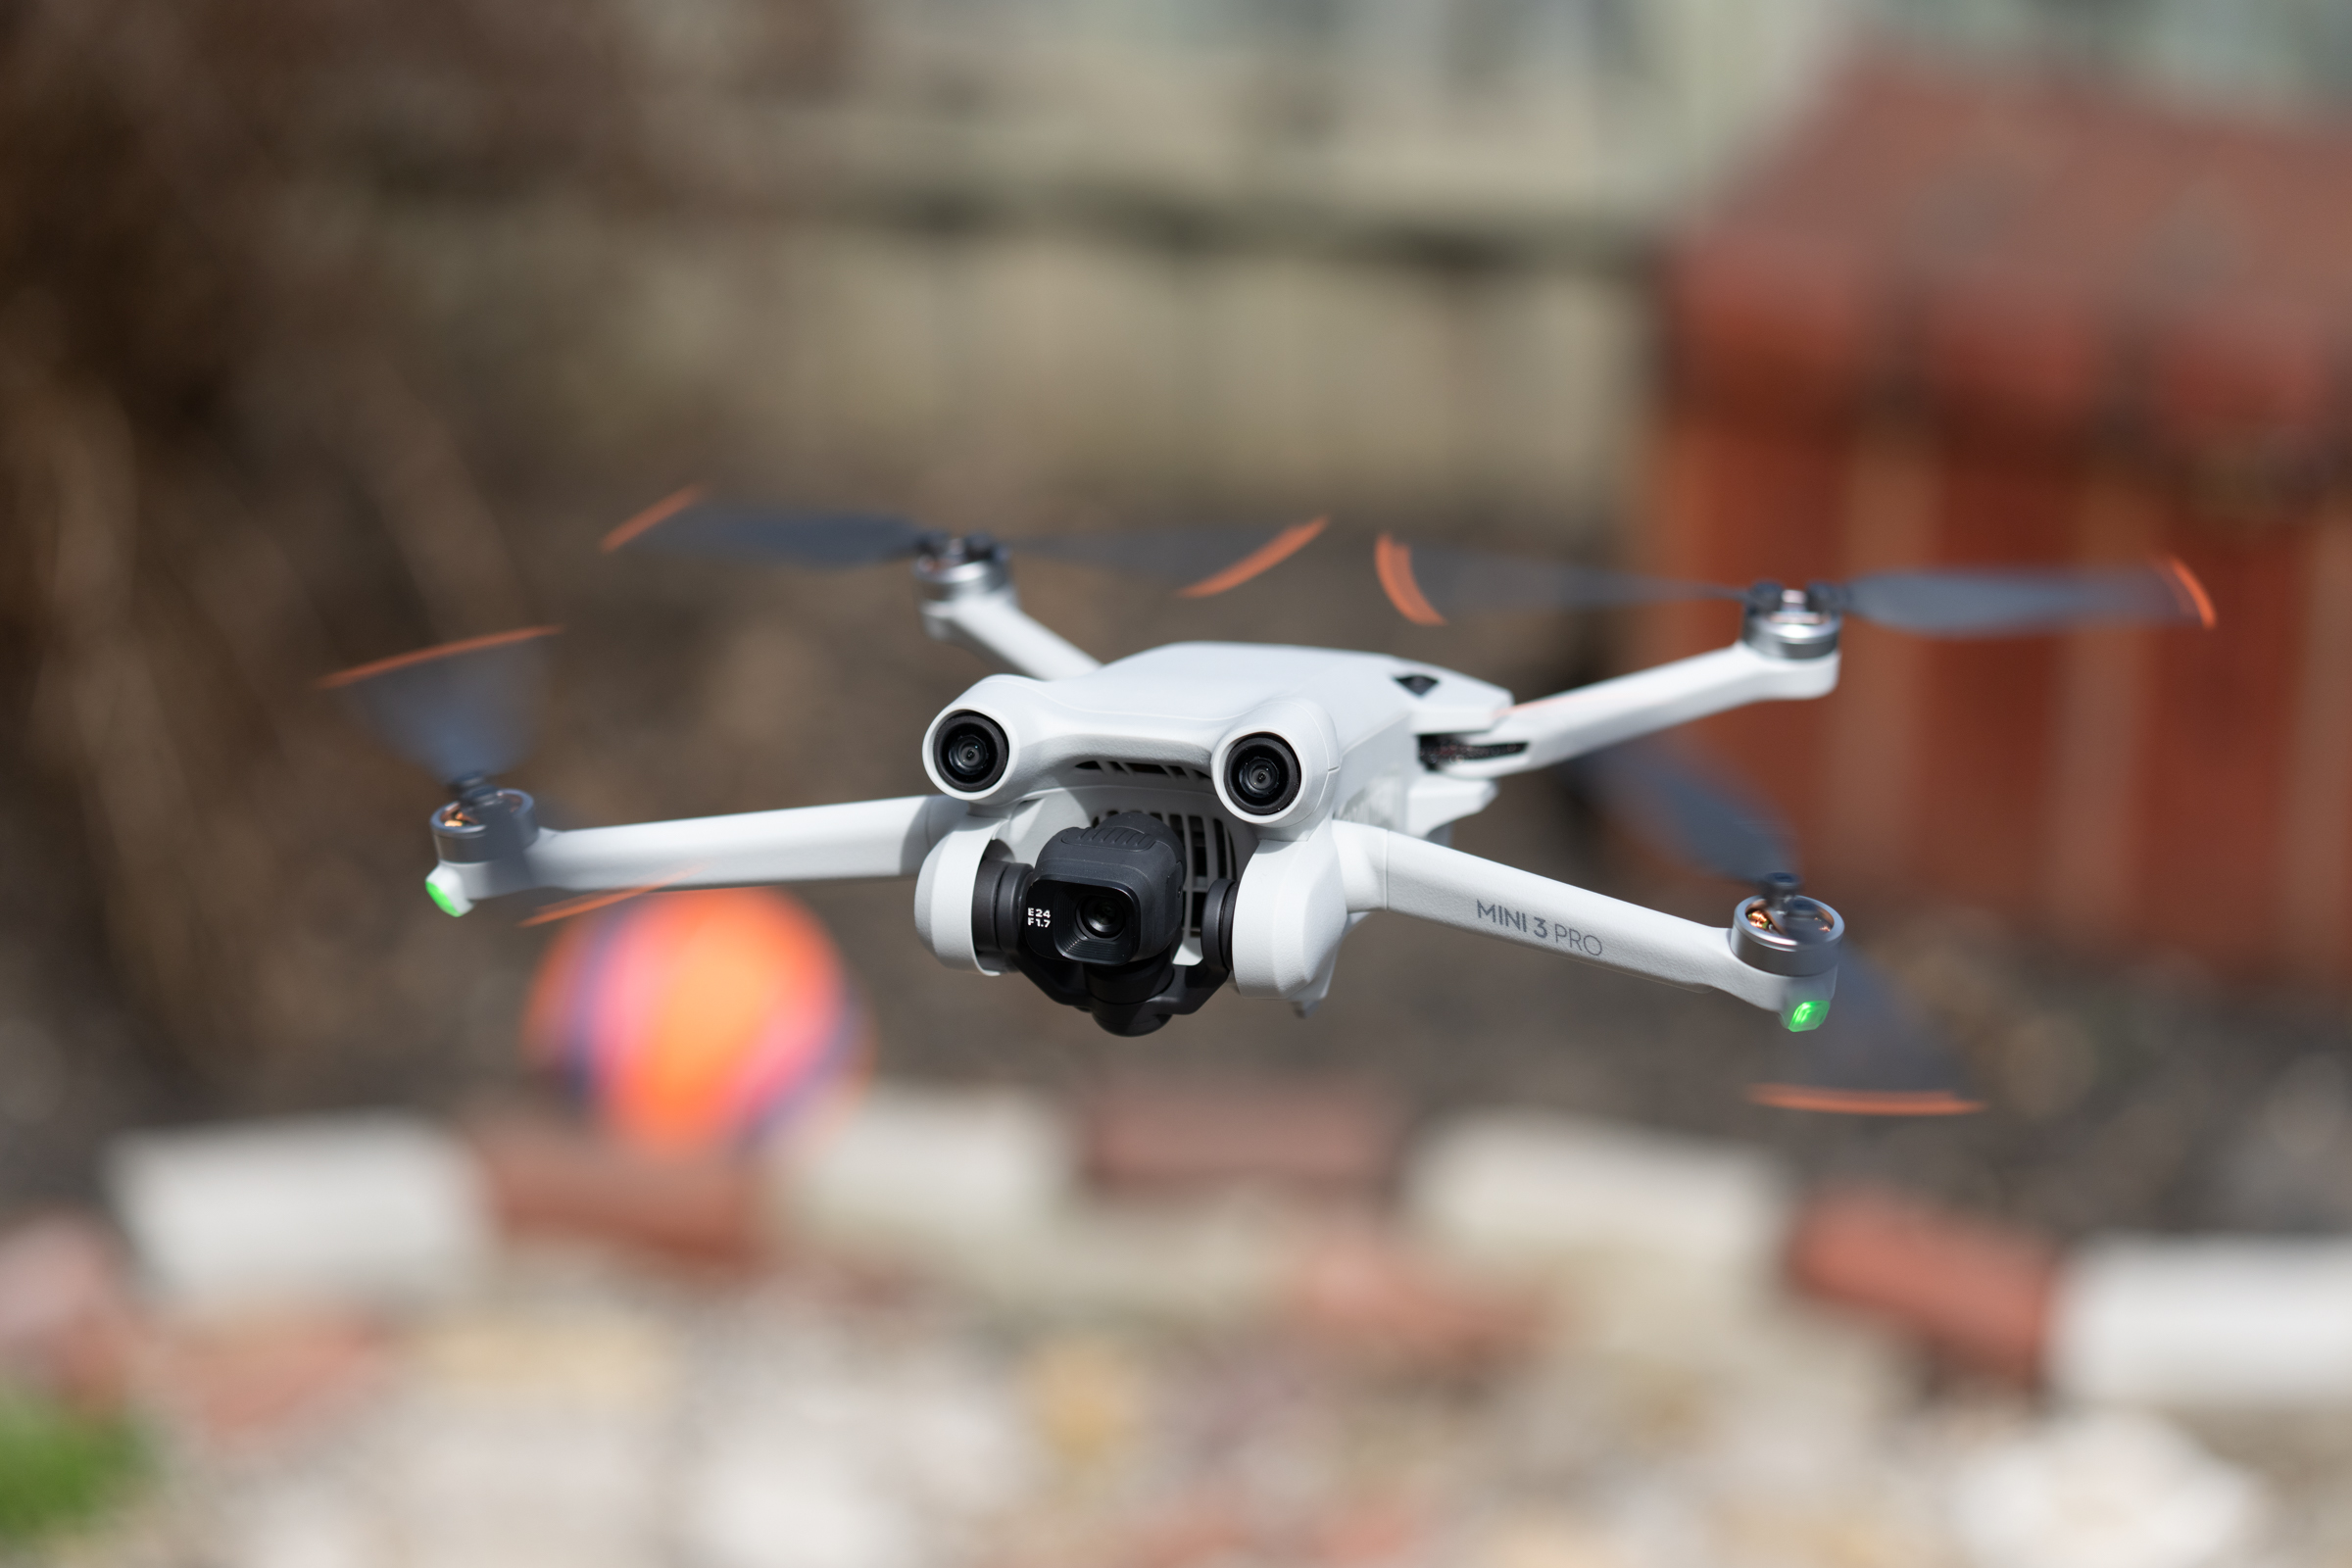 DJI's new Mini 3 Pro drone hits the aerial photography sweet spot